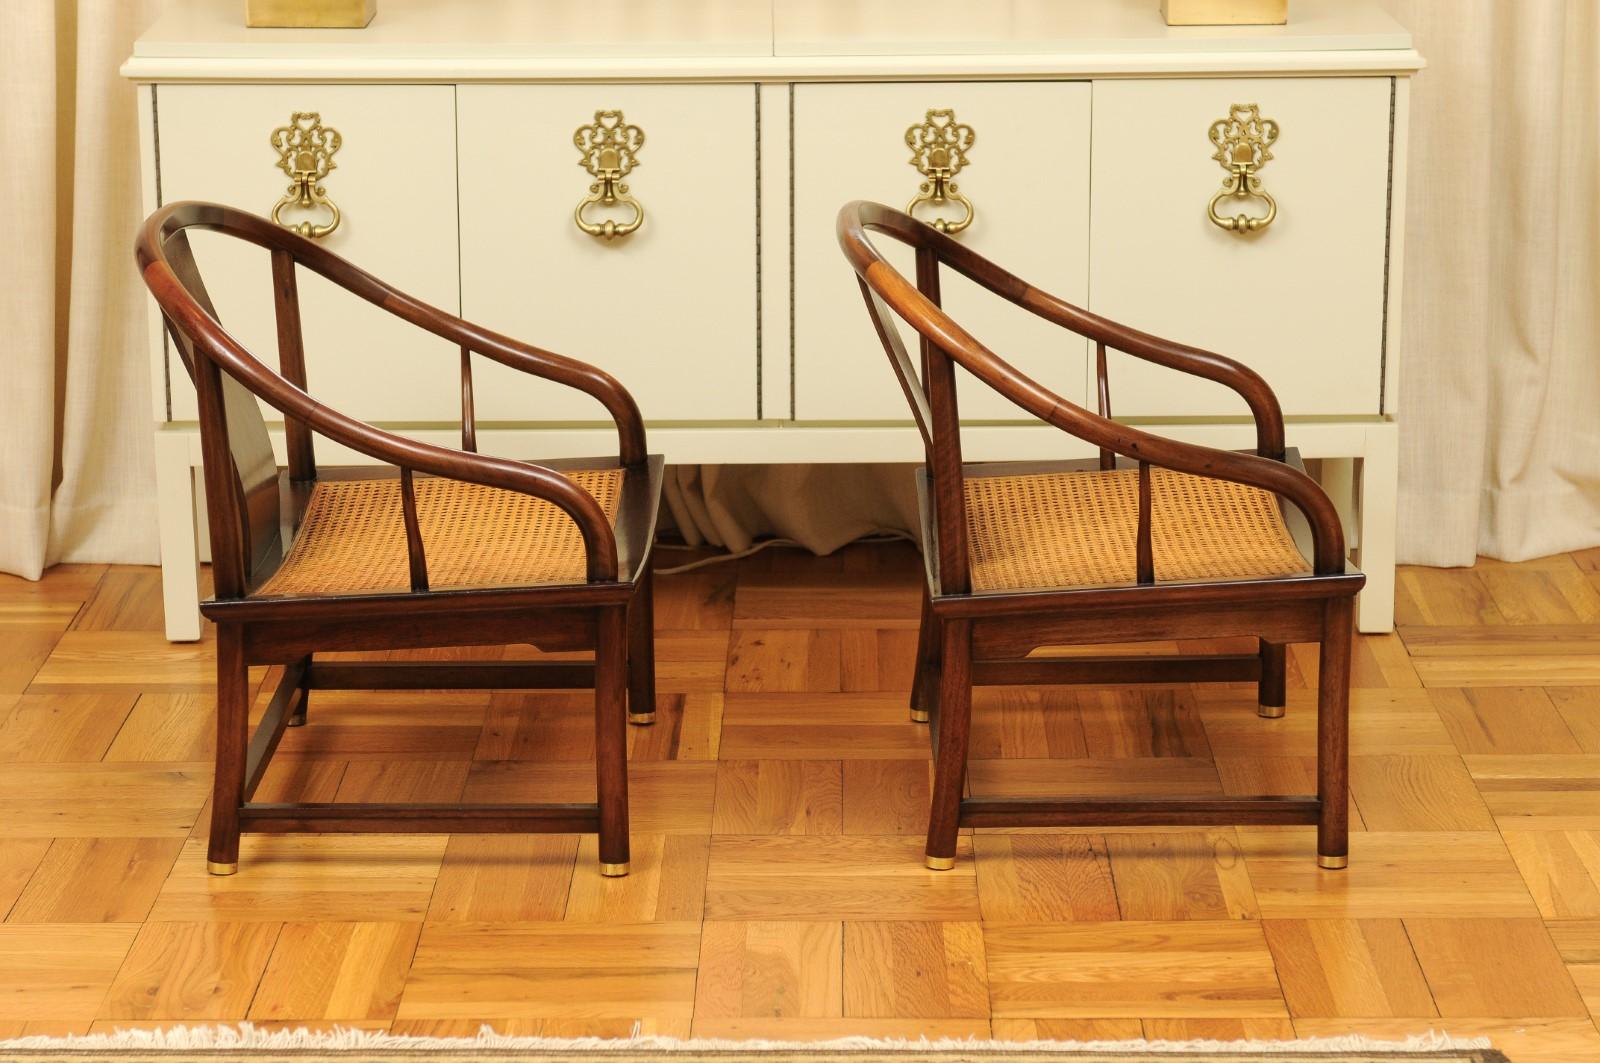 Stunning Restored Pair of Walnut Cane Loungers by Michael Taylor, circa 1960 For Sale 5